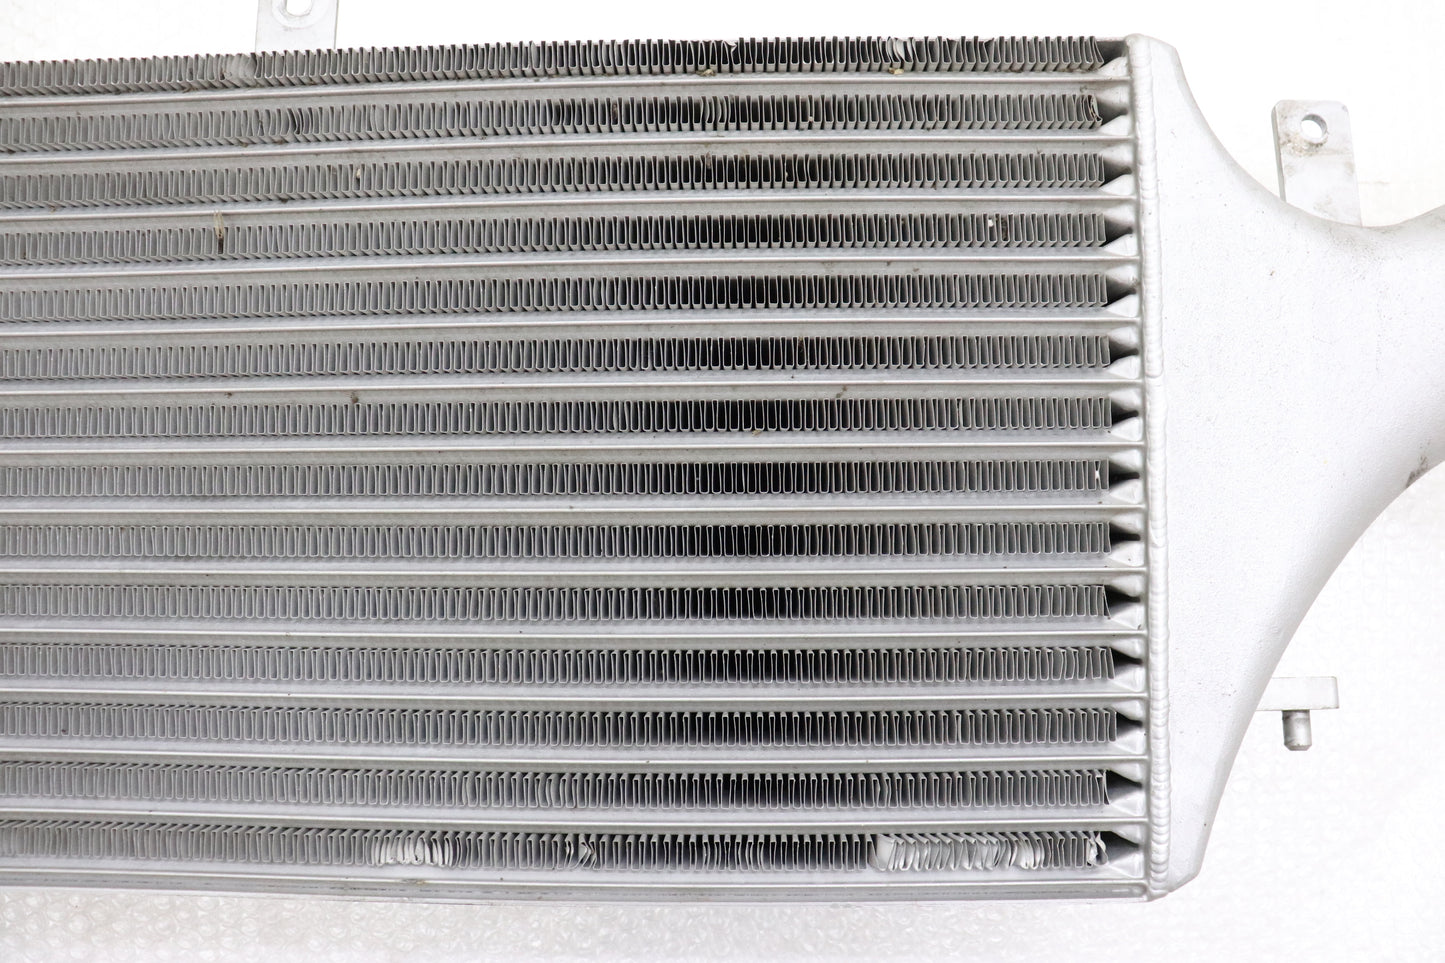 【USED】 ARC Intercooler Super Thick Type - BNR34